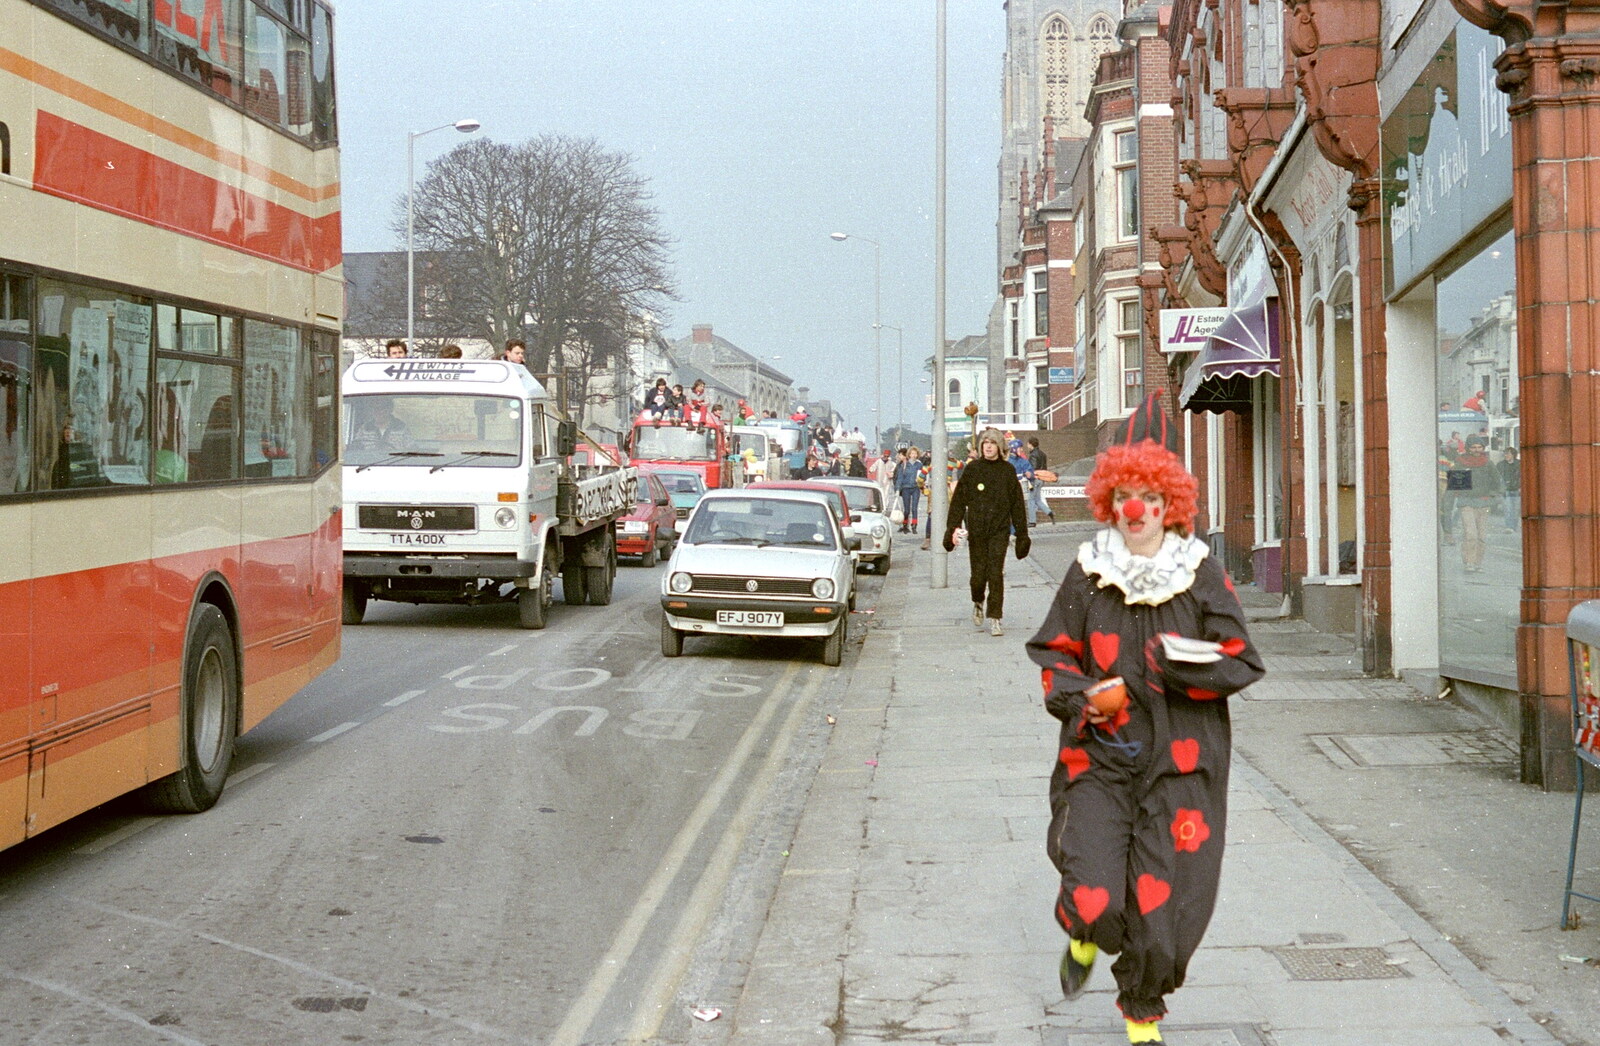 Another clown on North Hill from Uni: PPSU "Jazz" RAG Street Parade, Plymouth, Devon - 17th February 1986